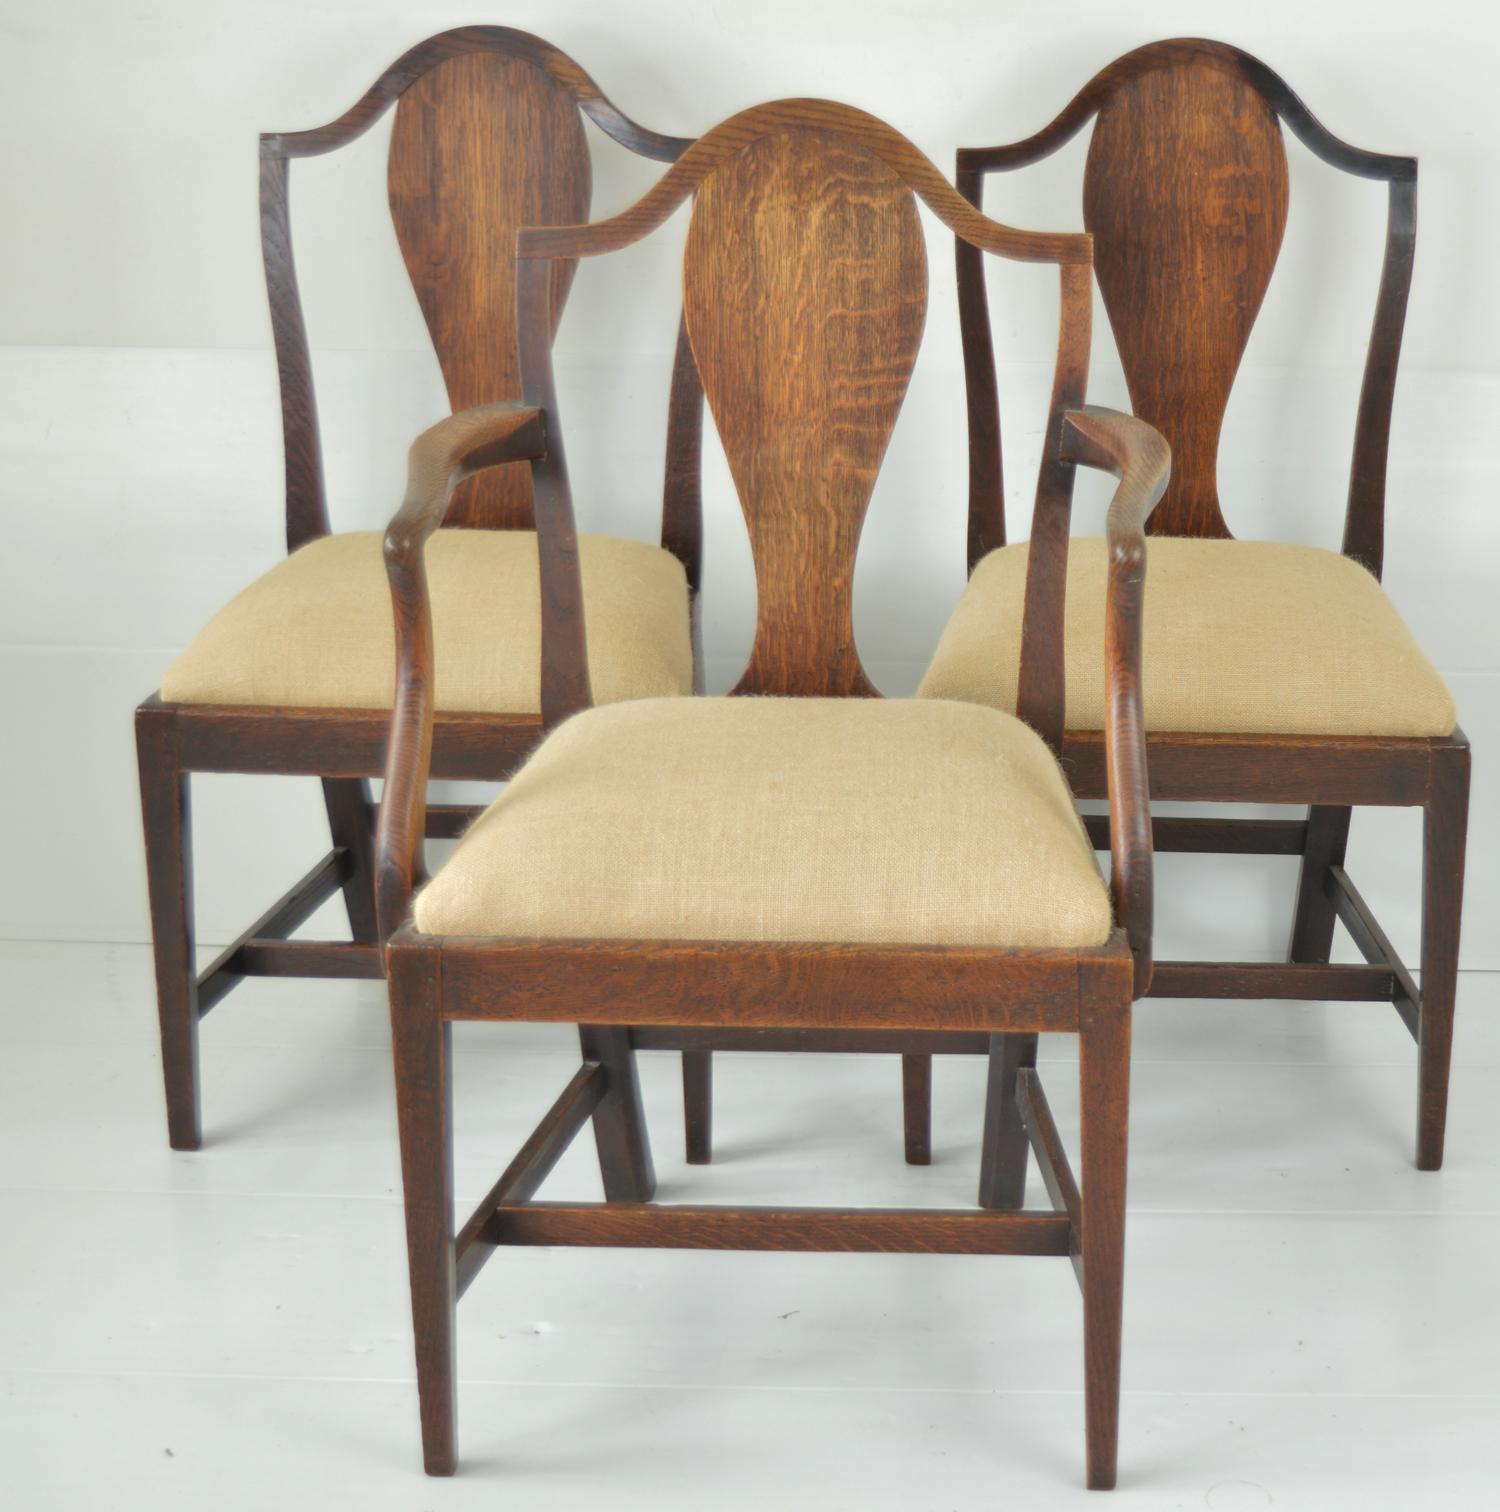 Polished Set of 6 Antique Oak Country Hepplewhite Chairs, English, 18th Century